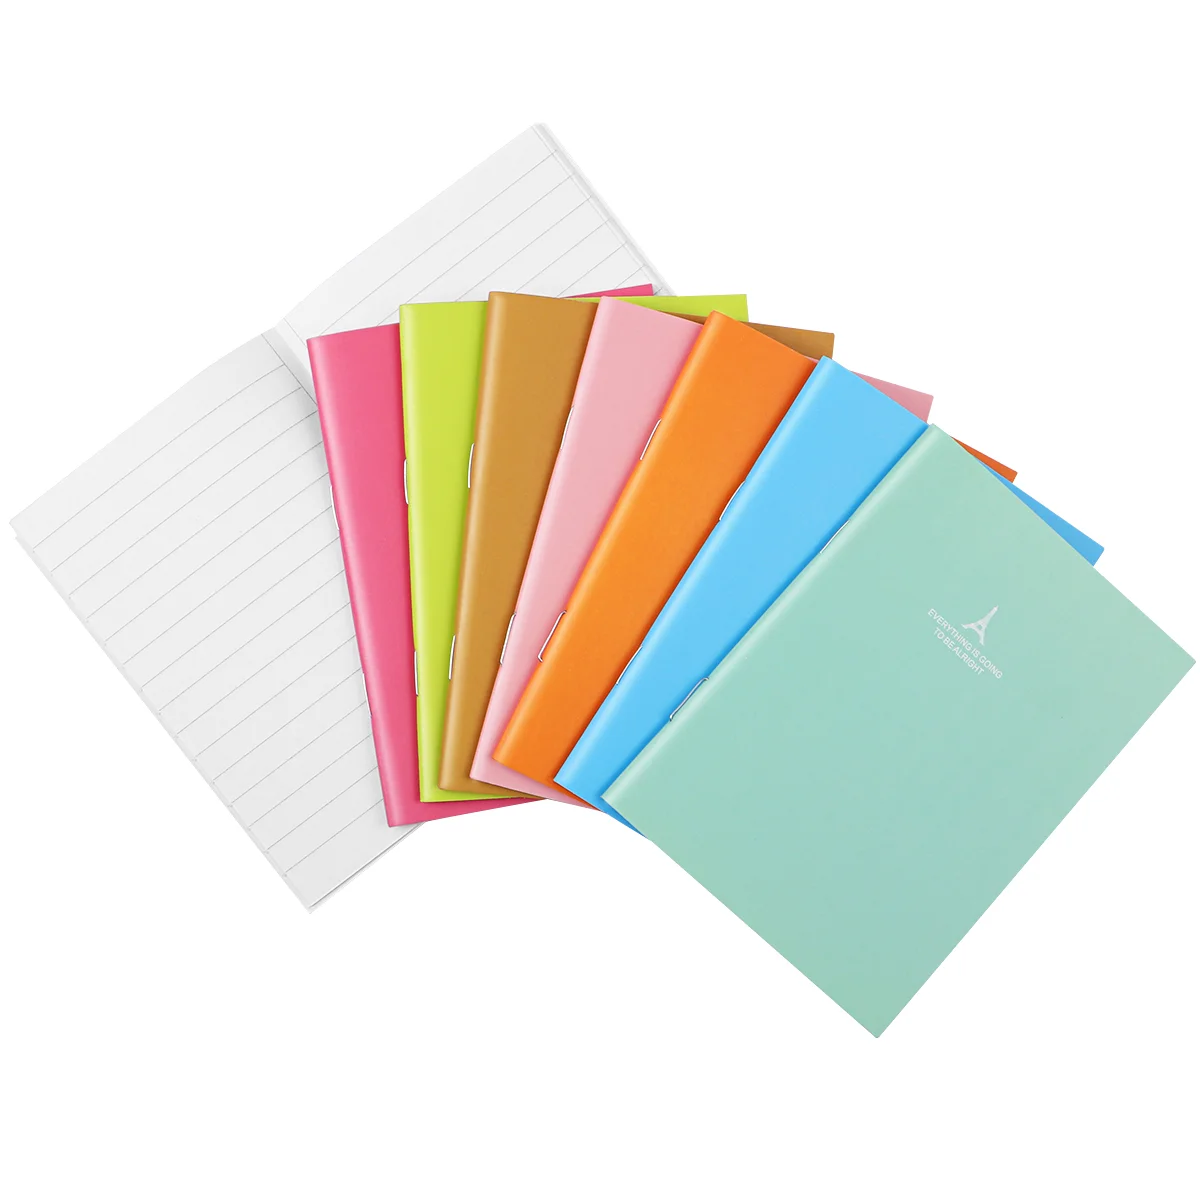 

24pcs Notebook Candy Colors Portable Memo Notebook, Pocket Journals Blank Notepads for Students Supplies ( 8 Notebooks school